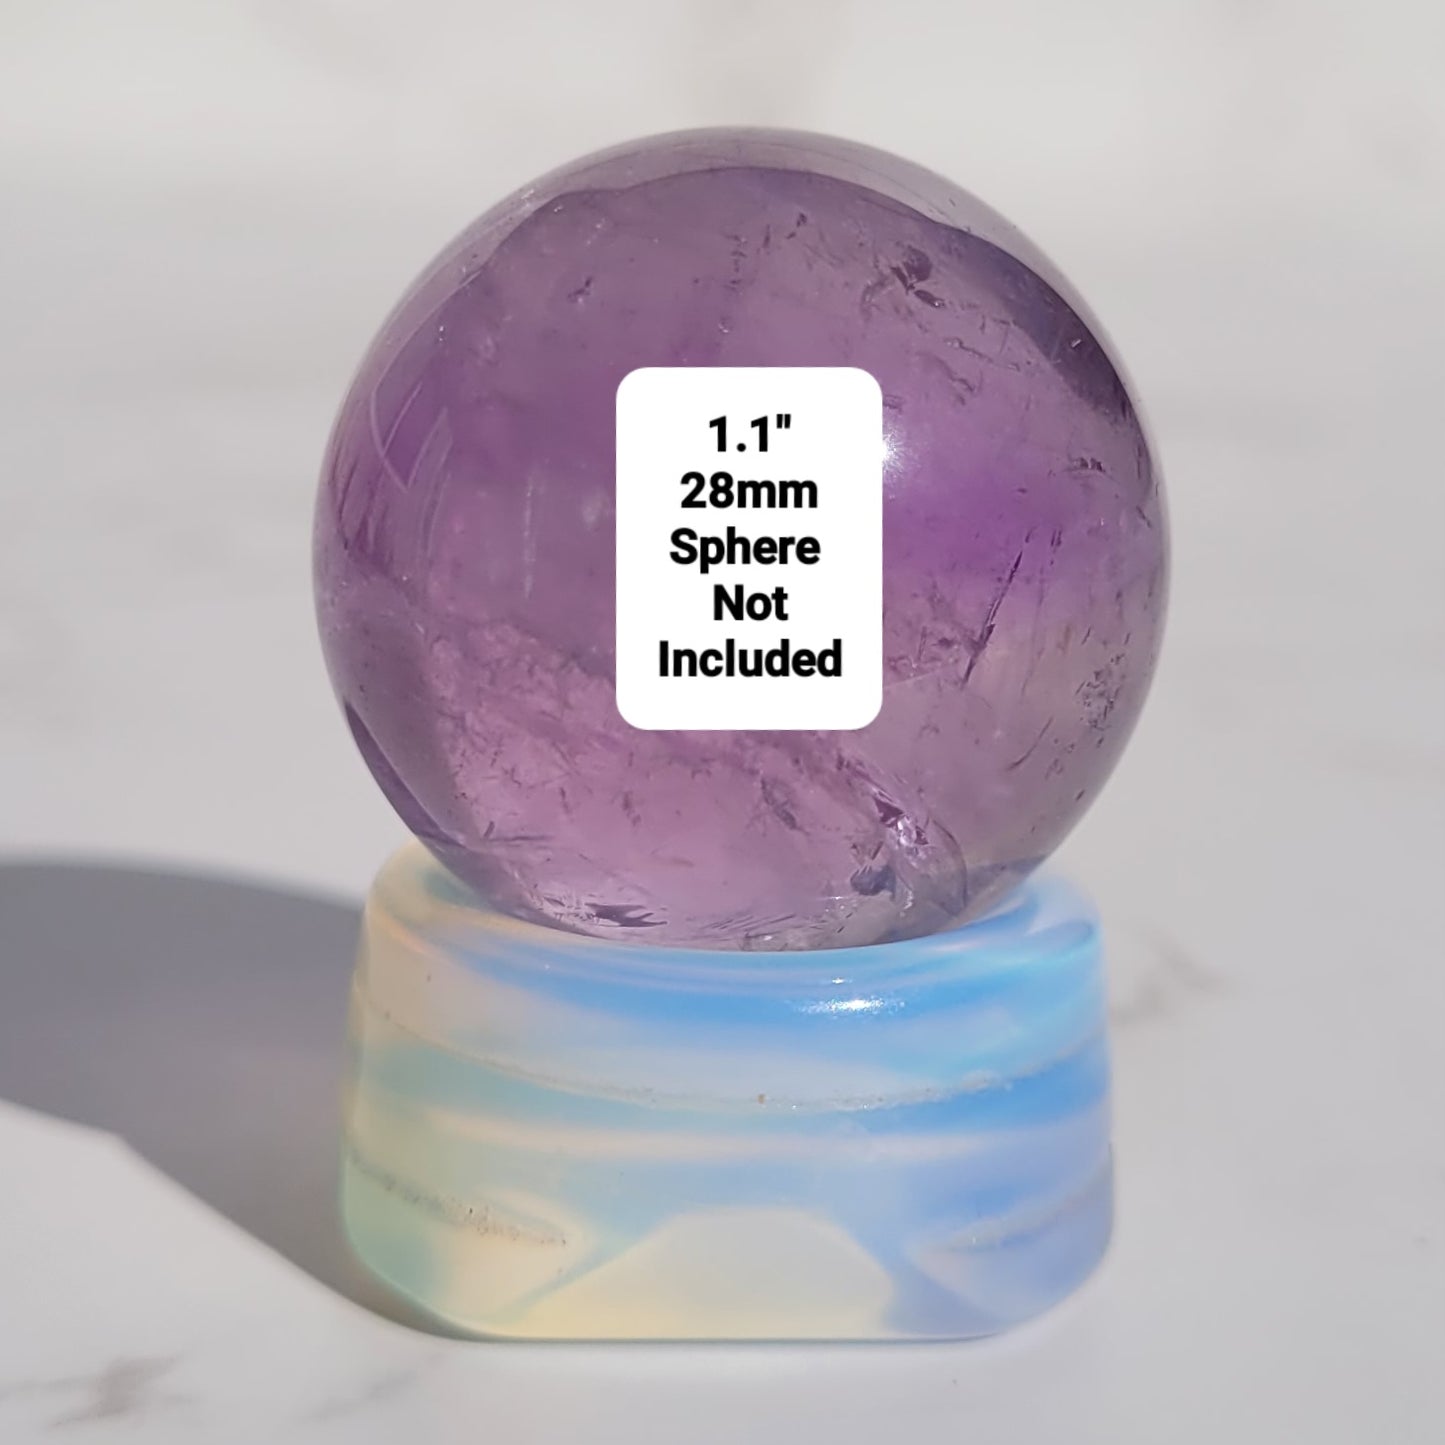 100% Crystal Sphere Stands in Many Materials in Clear Quartz, Howlite, Opalite, Moss Agate, Blue Sandstone, Red Jasper or Tigers Eye, for Crystal Balls or Eggs 1" to 2.5" (25mm to 64mm)